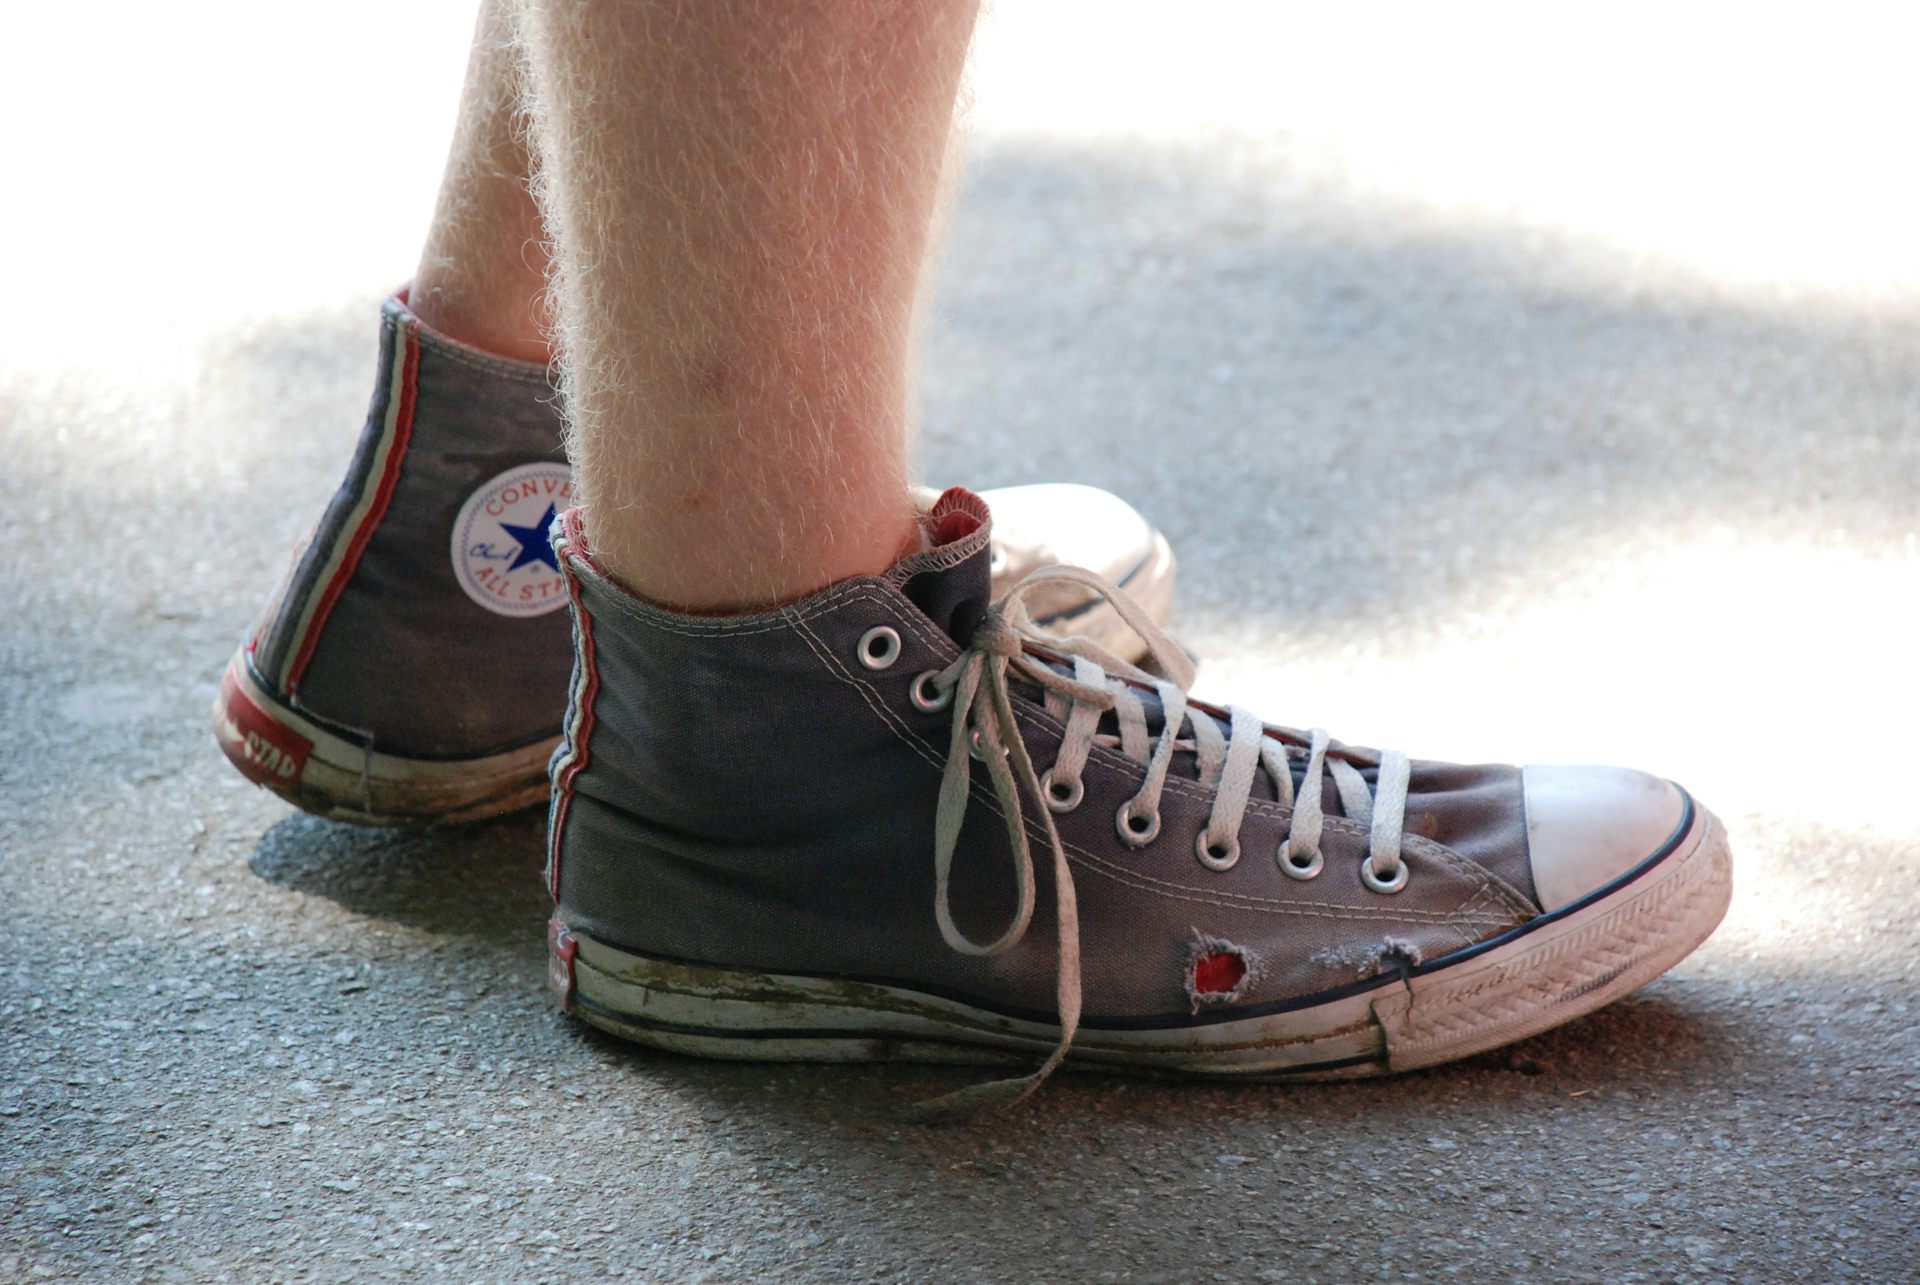 Why Converse has filed 31 lawsuits over 